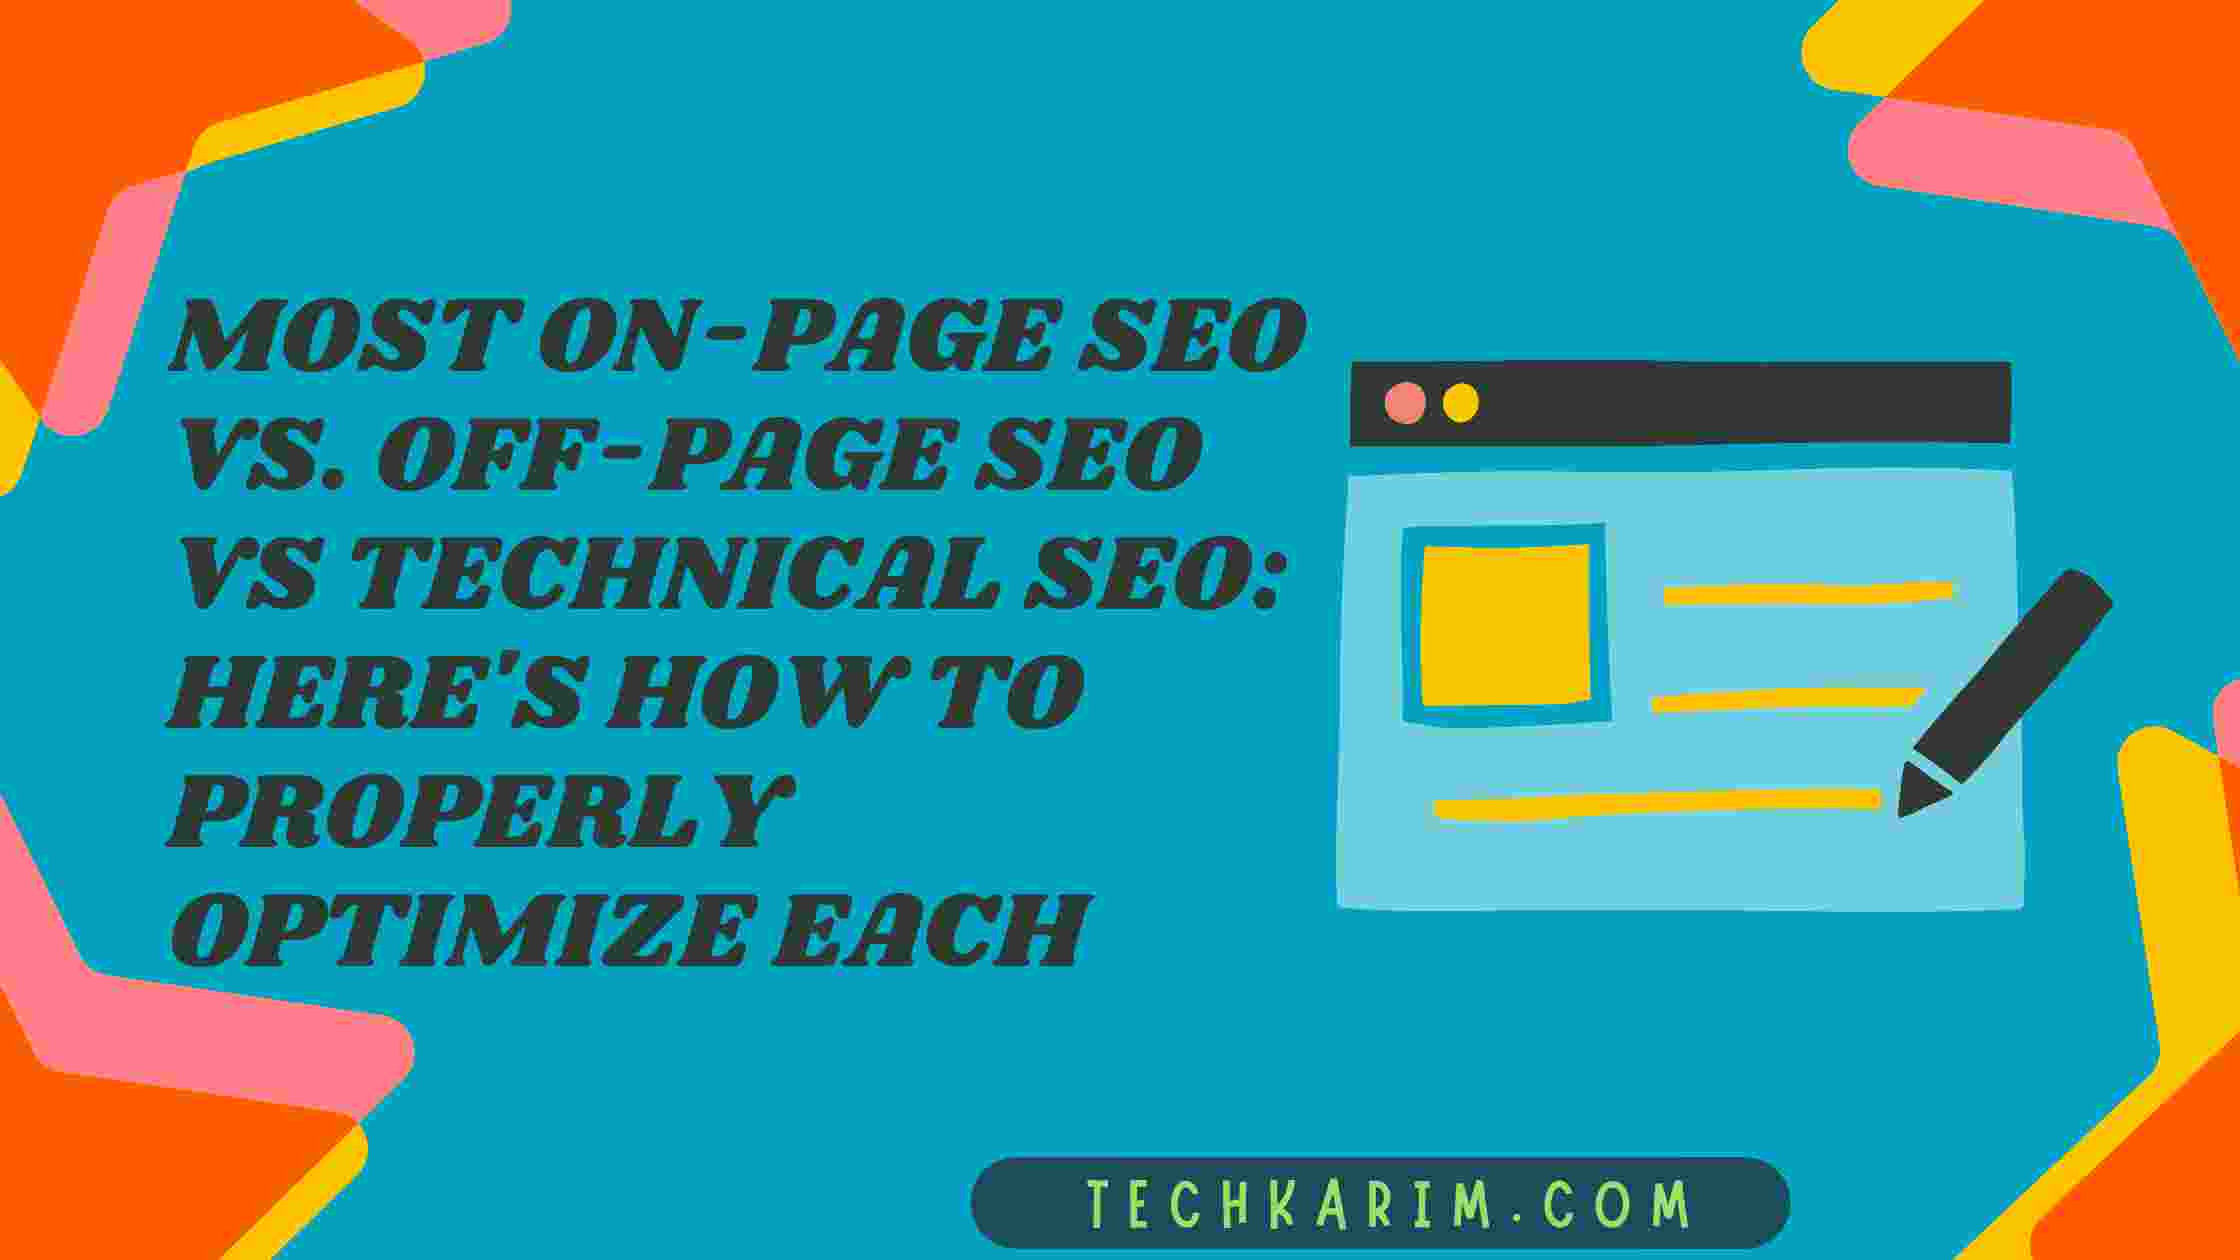 Most On-Page SEO VS. Off-Page SEO VS Technical SEO